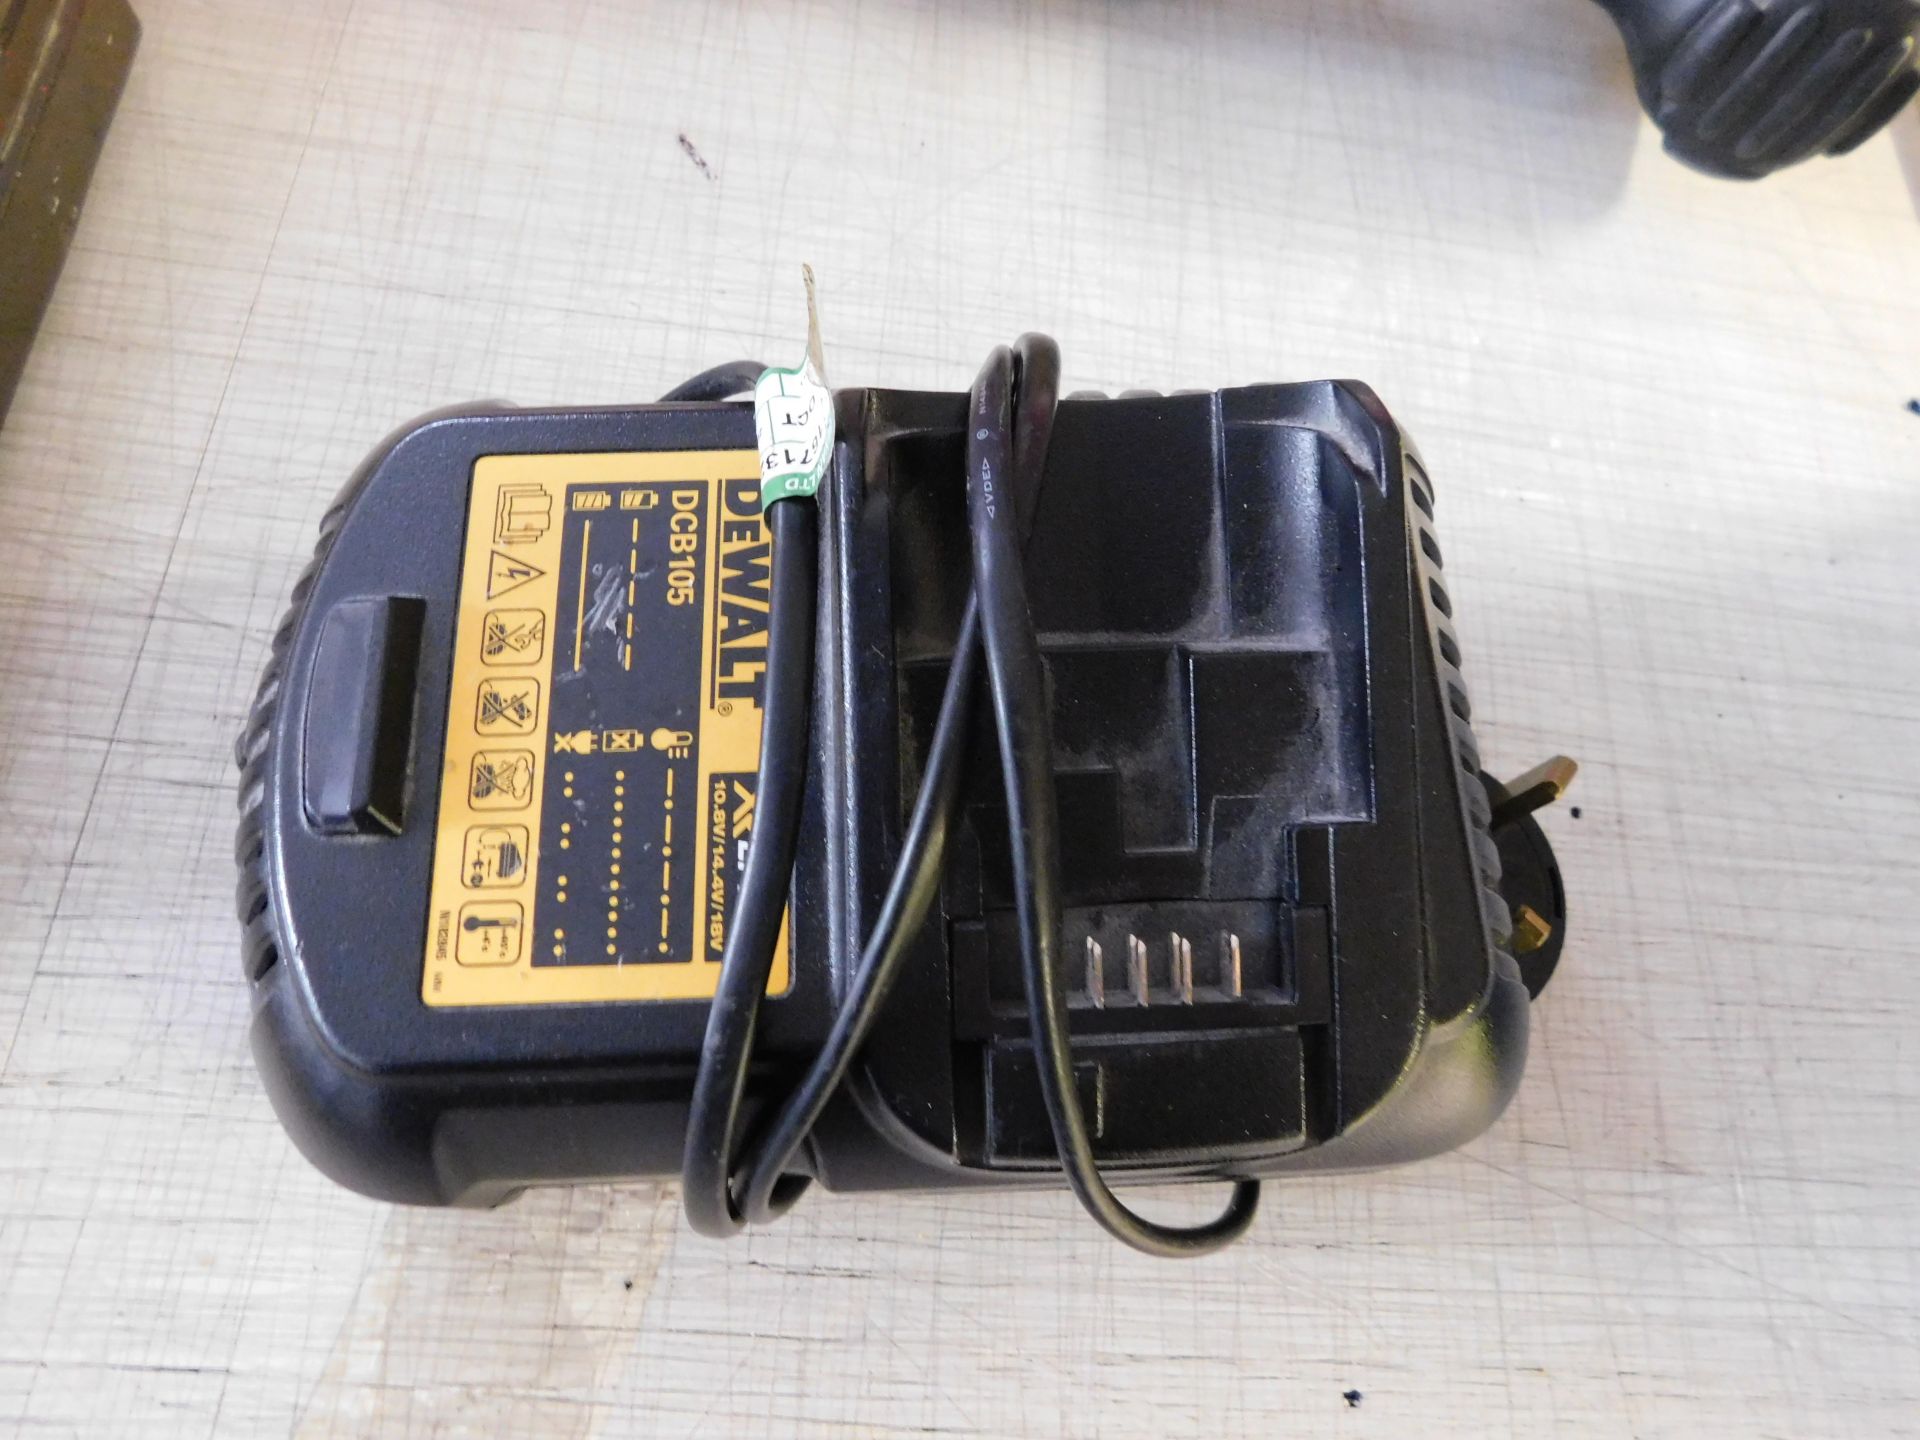 DeWalt 18v Cordless Drill, 2 Batteries, Charger & Carry Case (on mezzanine) (Location Rochdale. - Image 3 of 8